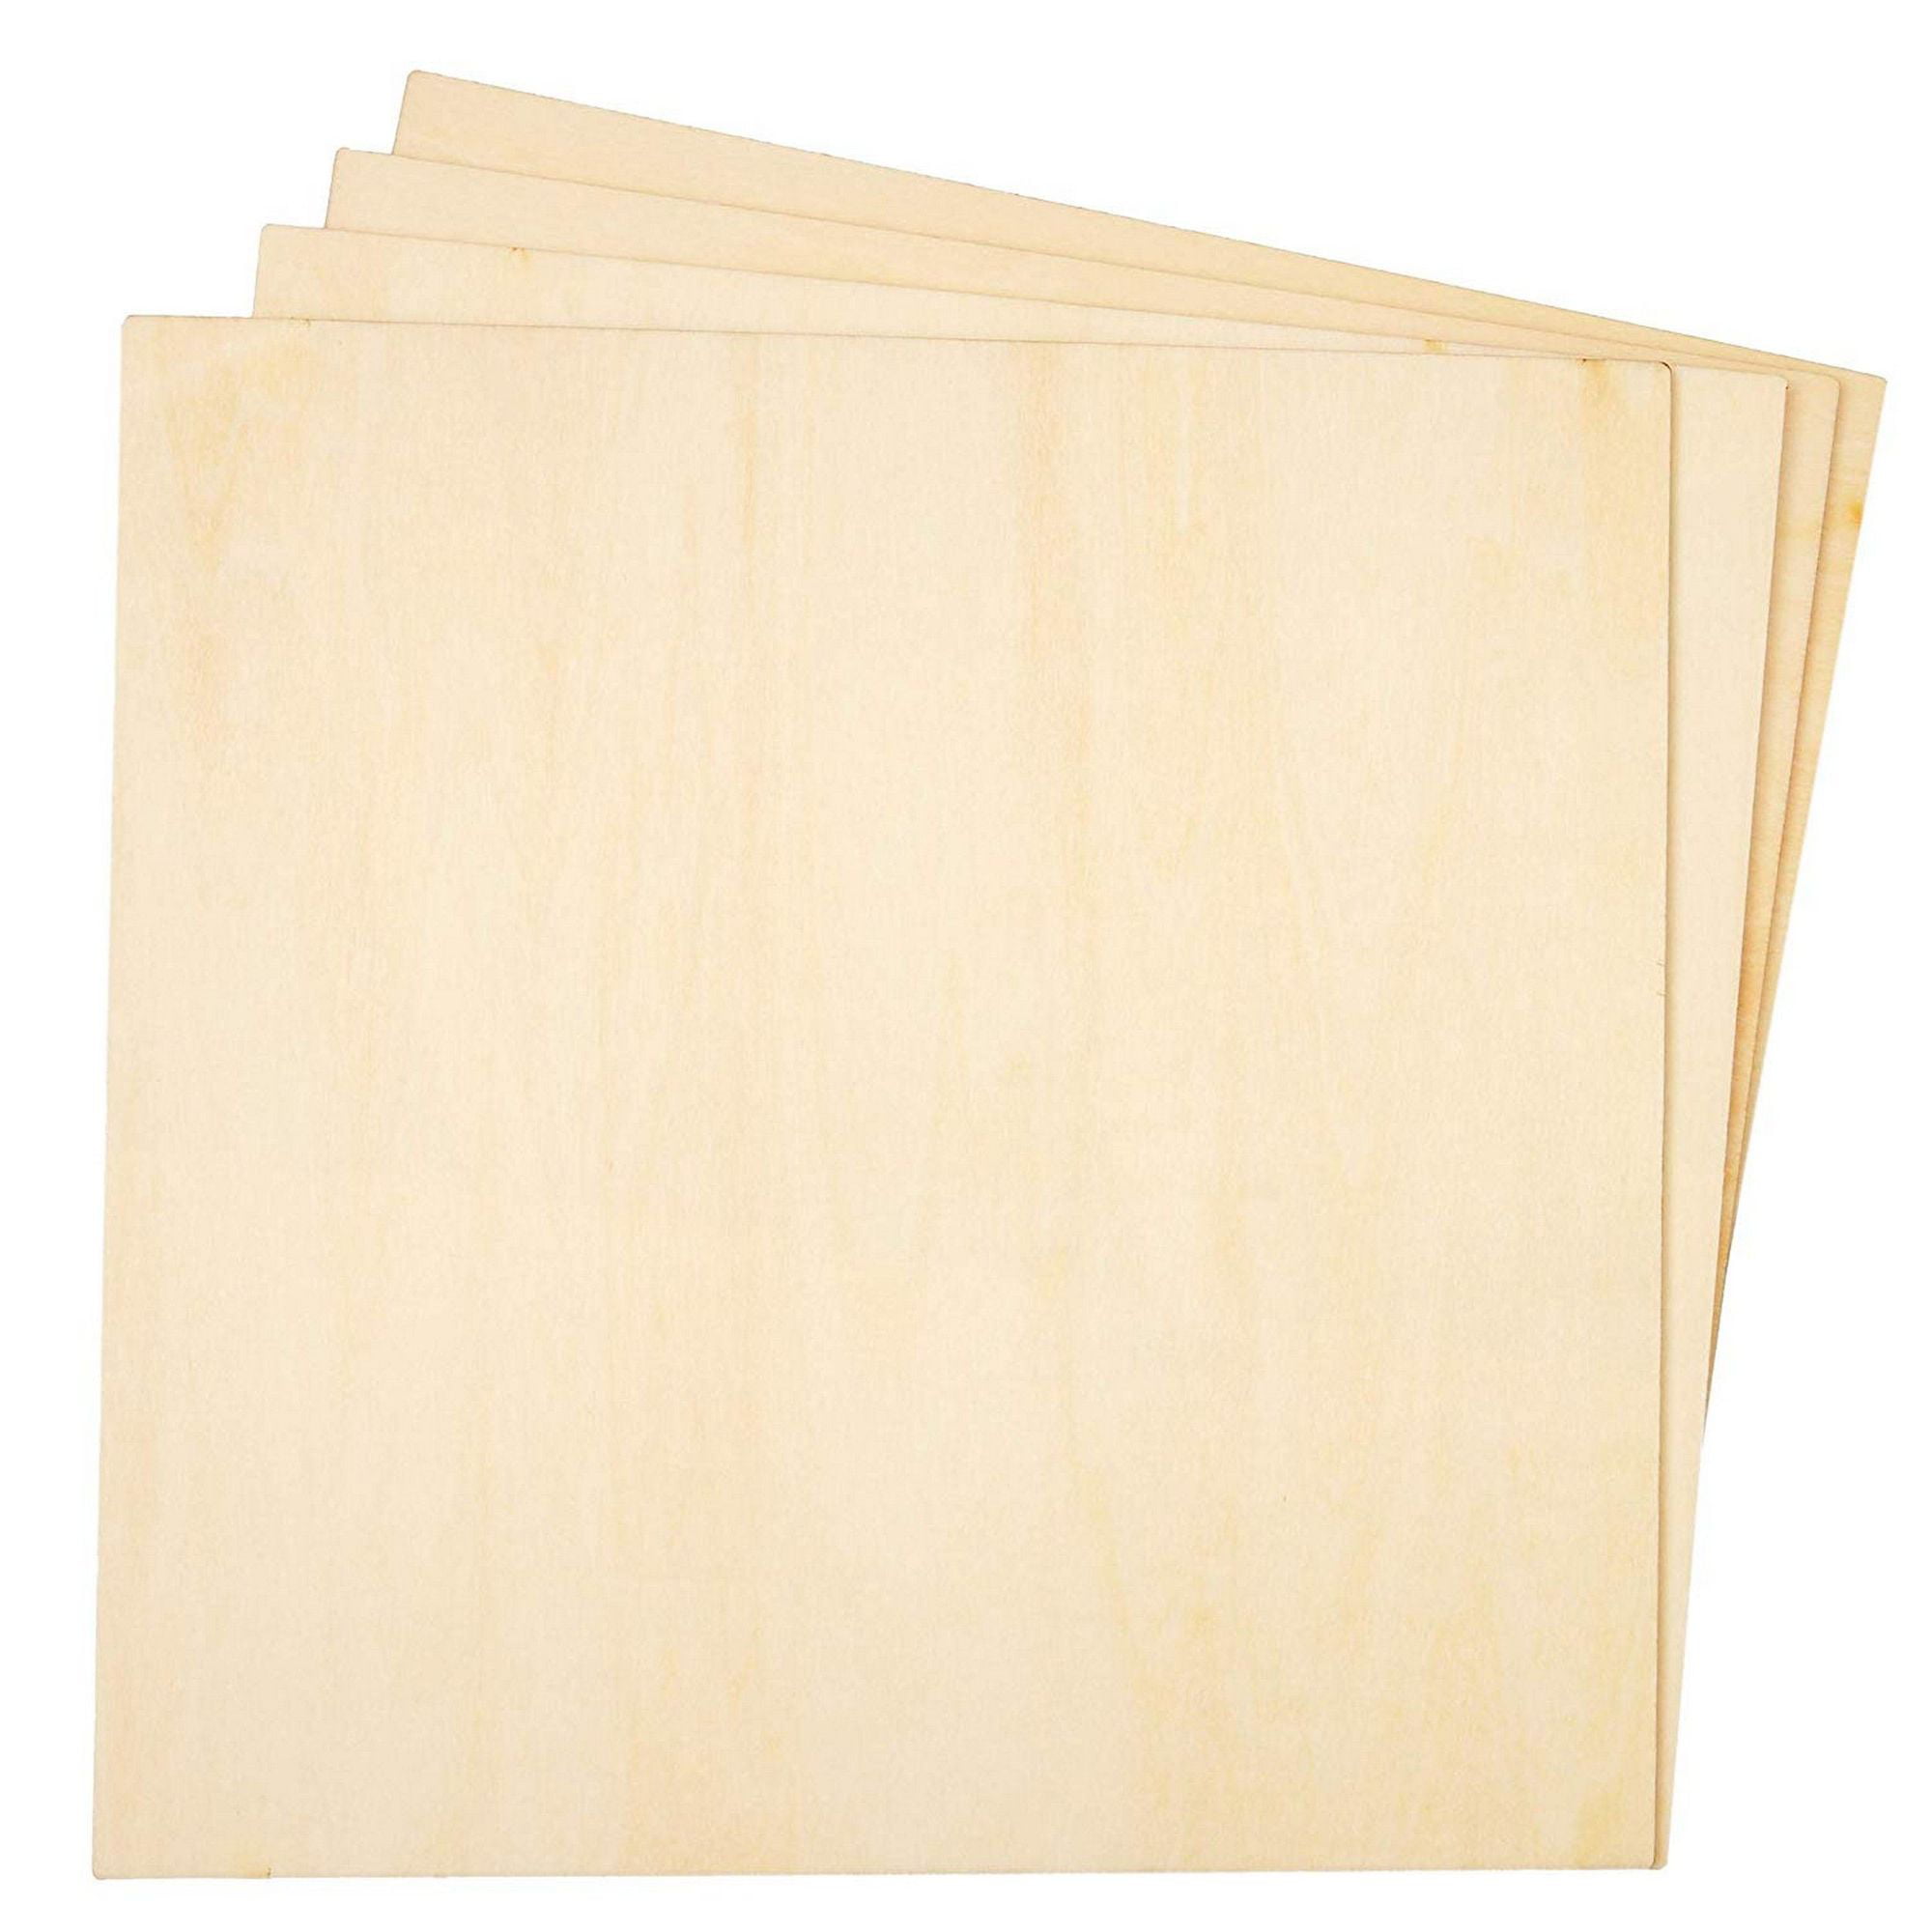 Natural Color Basswood with Smooth Surface Perfect for Architectural Models Easy to Cut and Use 3mm Thick Square Plywood Sheets 12-Pack 6”x6”x1/8” Unfinished Basswood Sheets for Crafts 